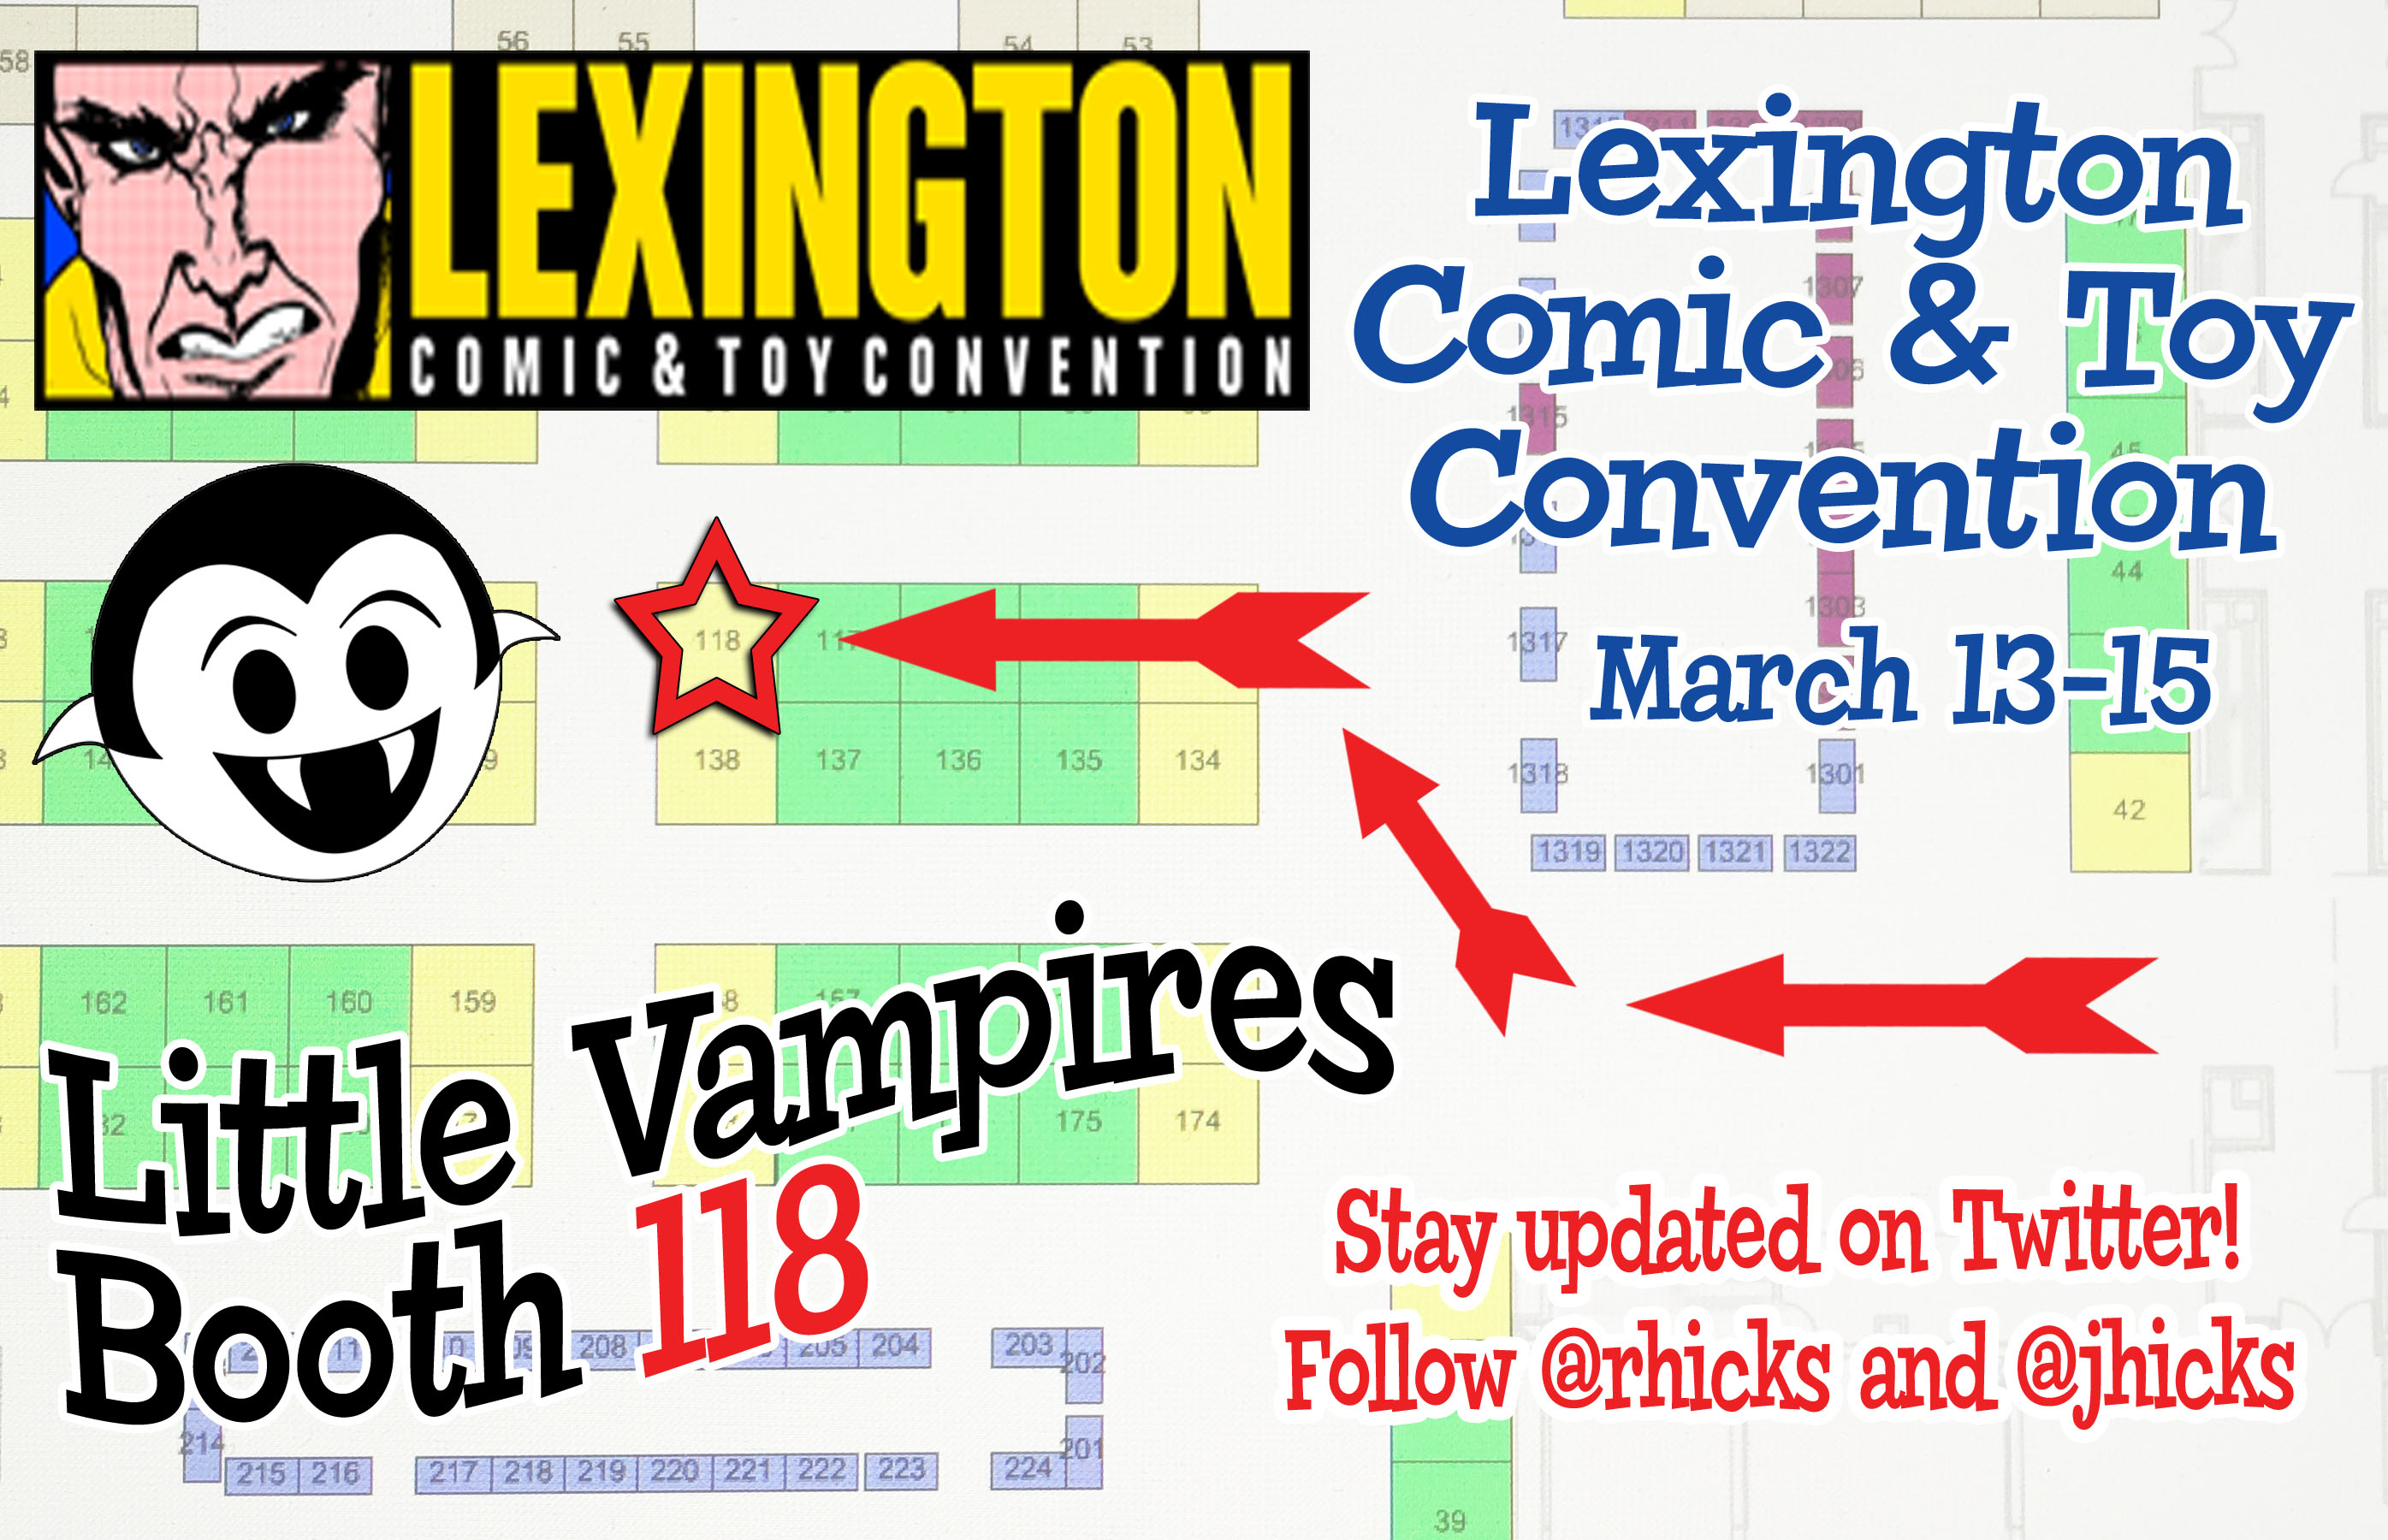 Lexington Comic and Toy Convention 2015 exhibitor floor map with the Little Vampires booth highlighted